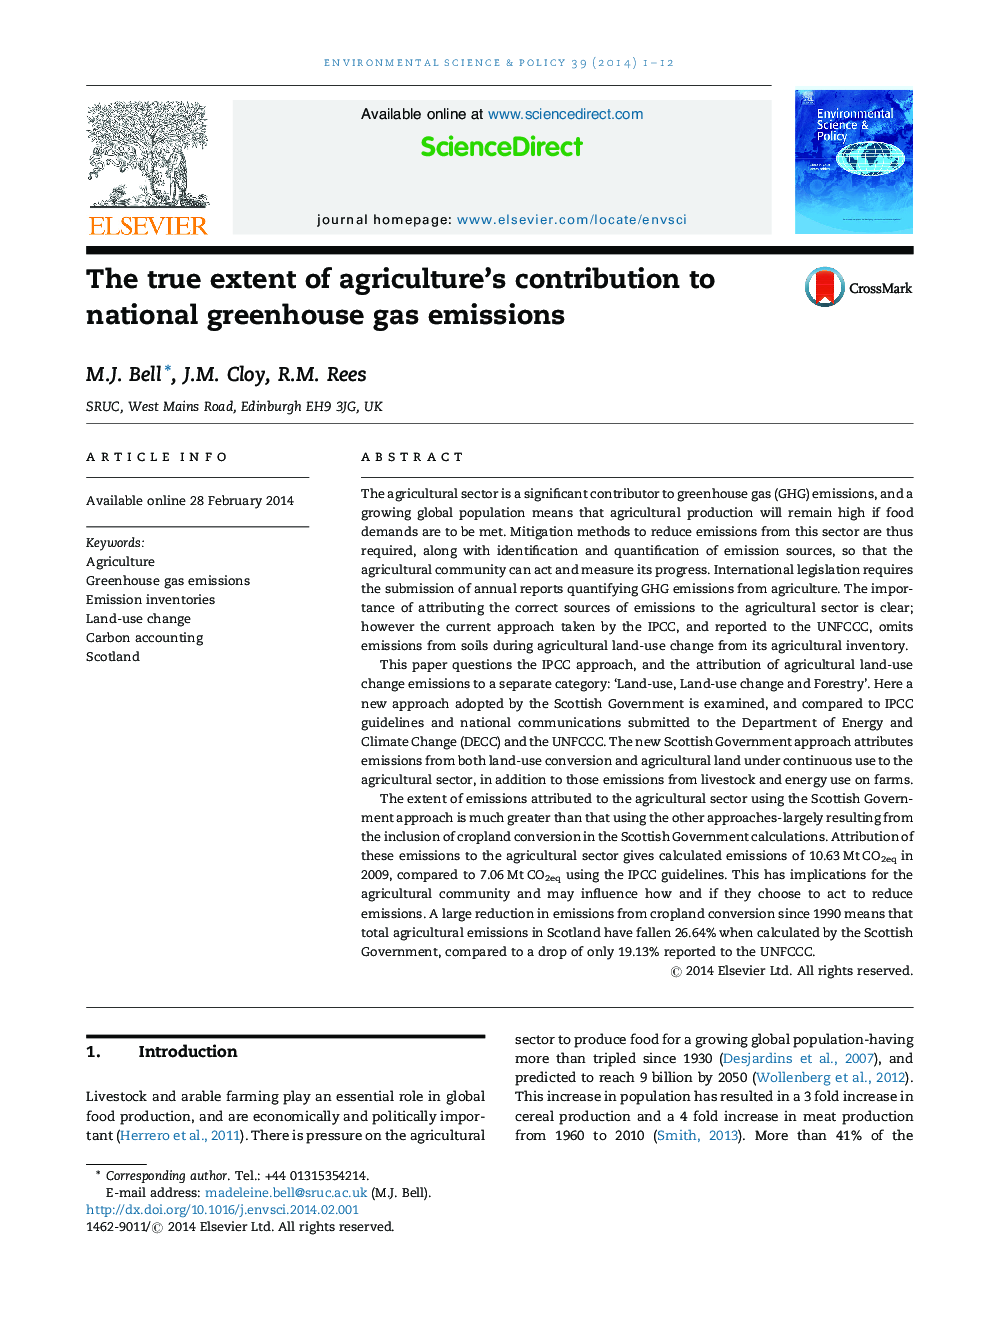 The true extent of agriculture's contribution to national greenhouse gas emissions